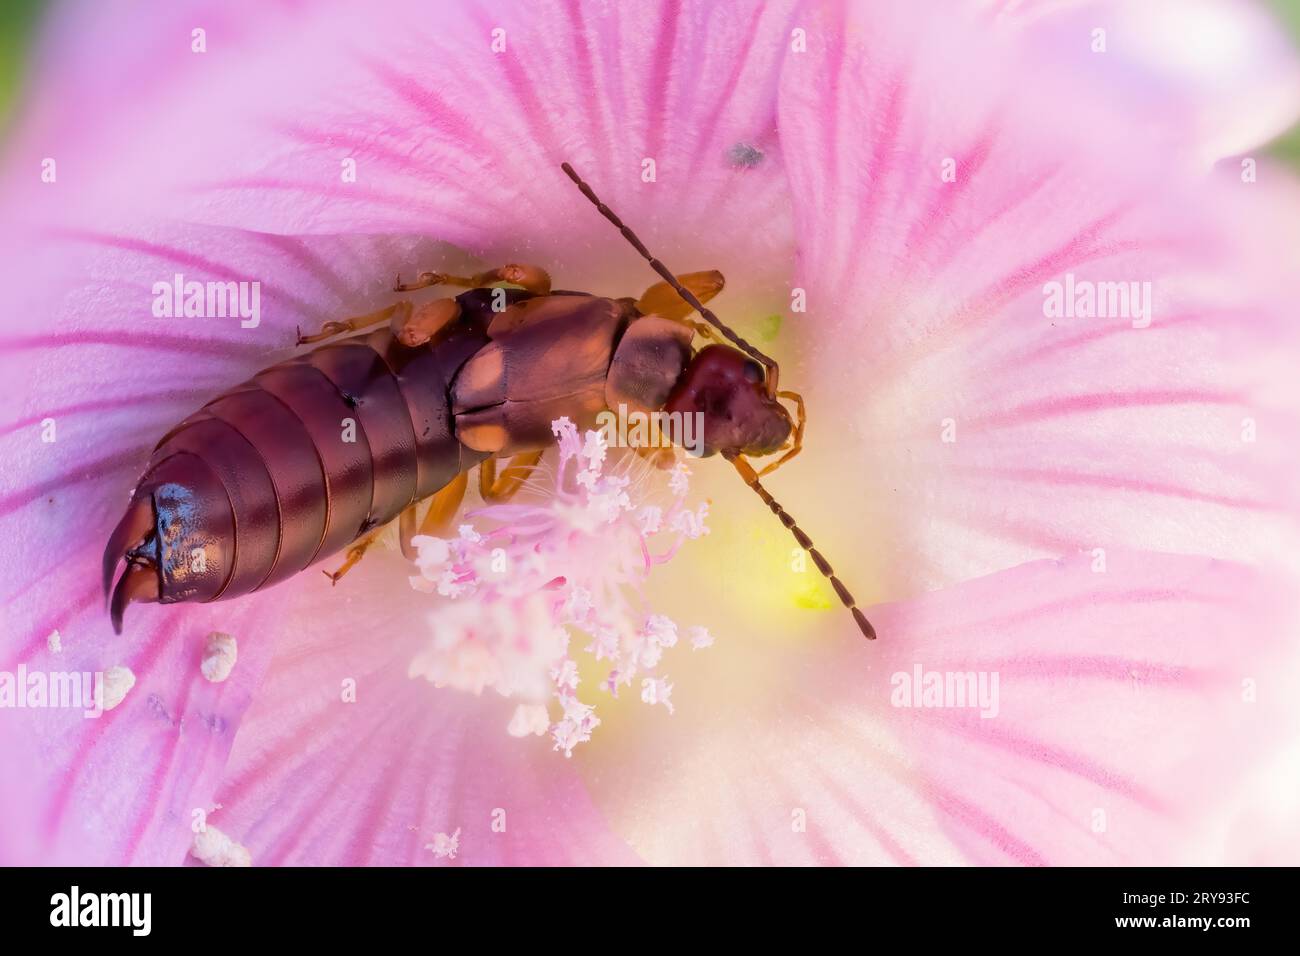 Common earwig (Forficula auricularia) in mallow flower (Malva sylvestris), Hesse, Germany Stock Photo